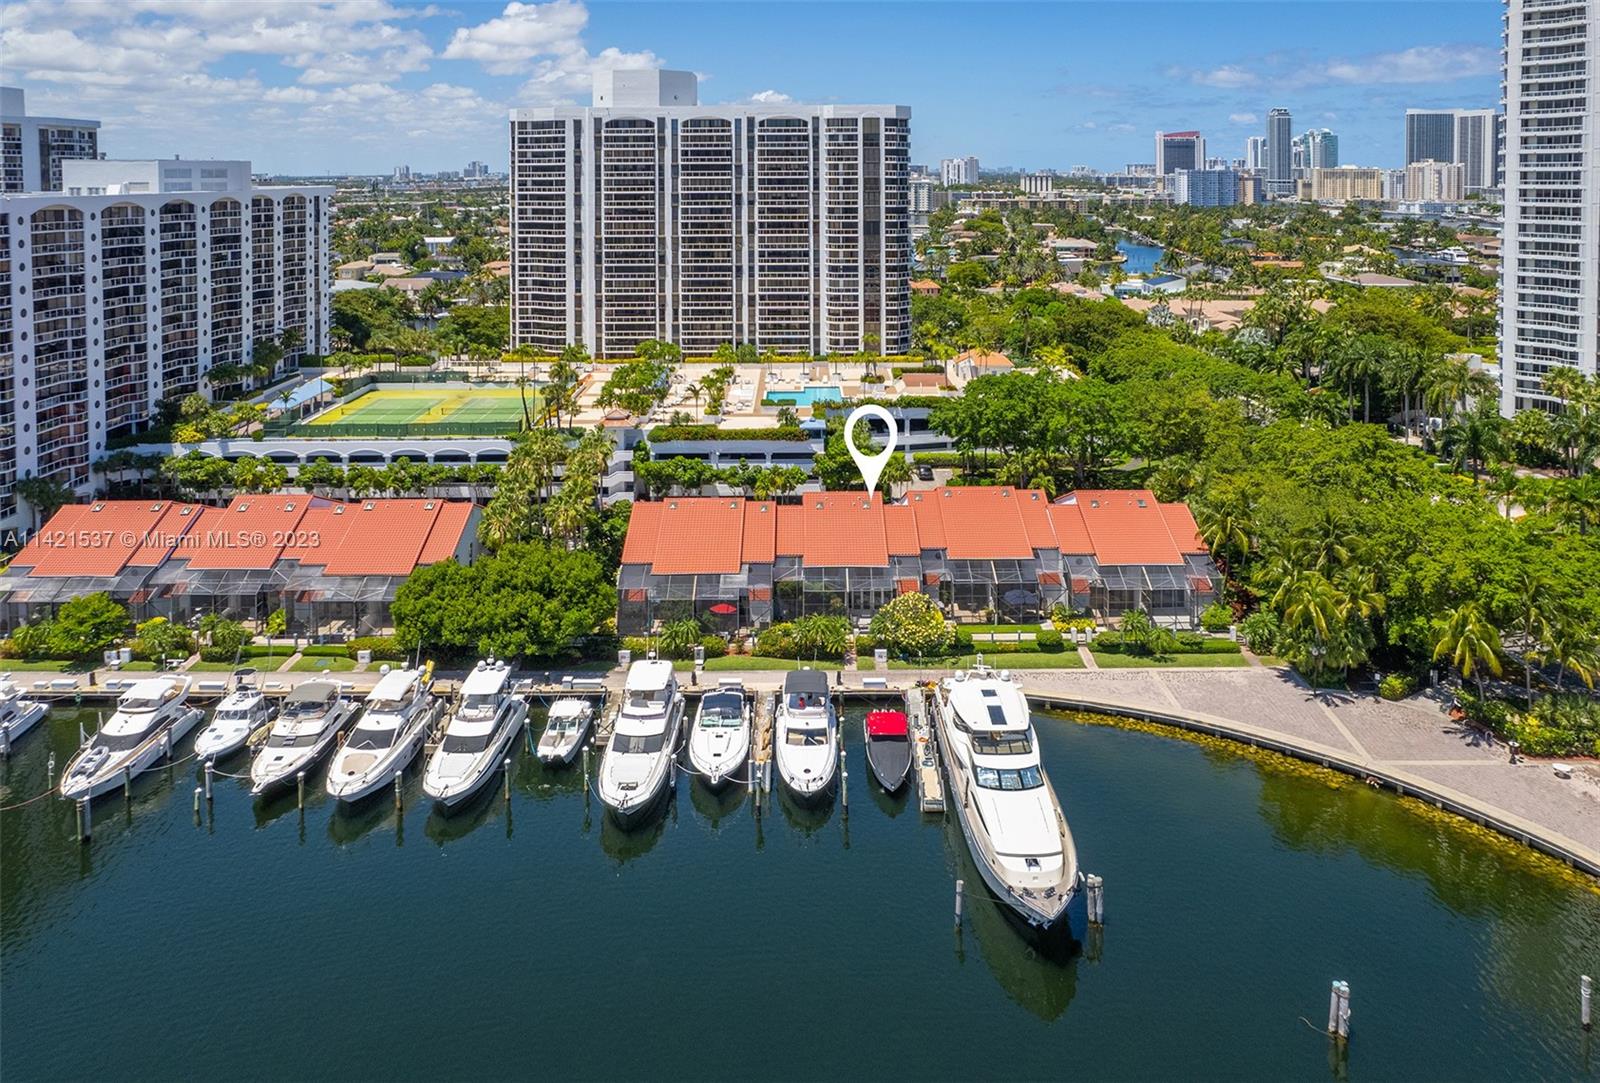 Experience the captivating charm of this waterfront townhome nestled in the vibrant heart of Aventura tucked away in the gated community of Portsview. Residence boasts open water views overlooking marina, breathtaking sunsets, garage and a private south-facing backyard for year-round sunshine.  Remodeled townhome features all impact windows/doors and light-filled modern interior. With 2BR/2.5BA, an open all white kitchen, dining area, and a cozy family room, this home offers a perfect blend of comfort and style, complemented by thoughtful improvements such as motorized blinds, French doors, custom epoxy coated garage, wall treatments and more.  Nestled between Miami and Fort Lauderdale with shops, dining and entertainment nearby, enjoy the low maintenance lifestyle of townhome living.